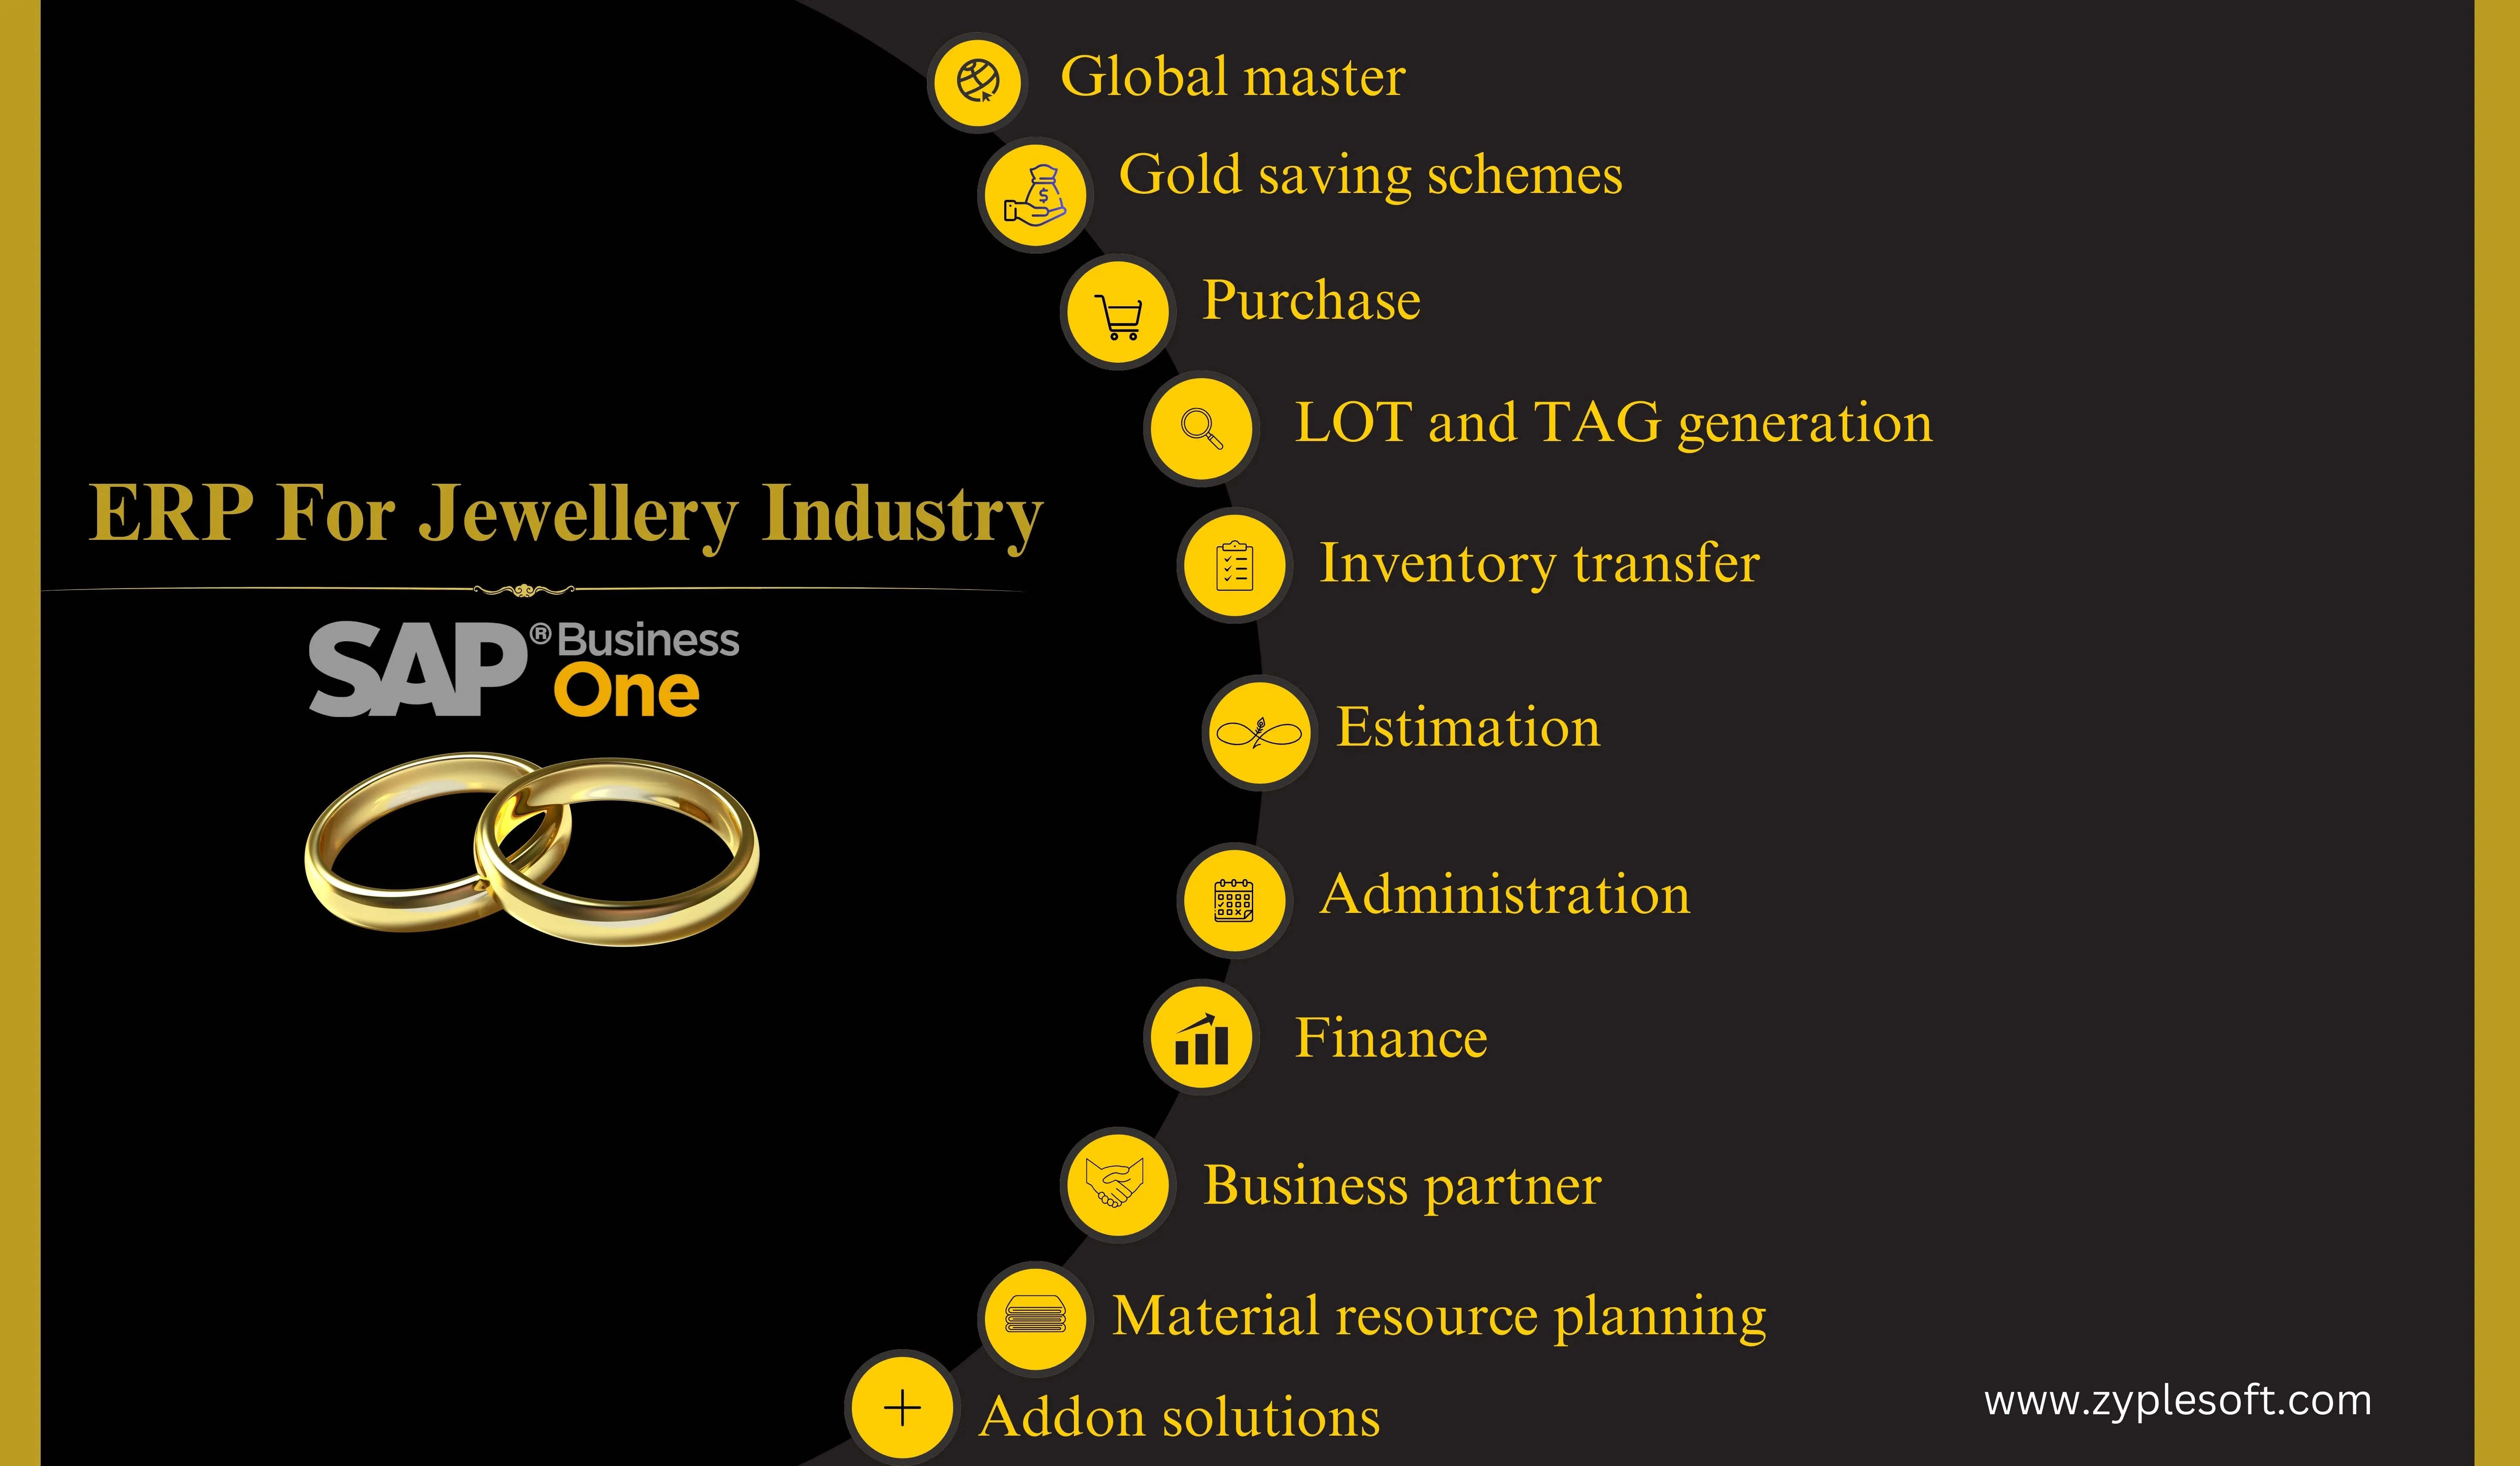 SAP Business One ERP for Jewellery industry